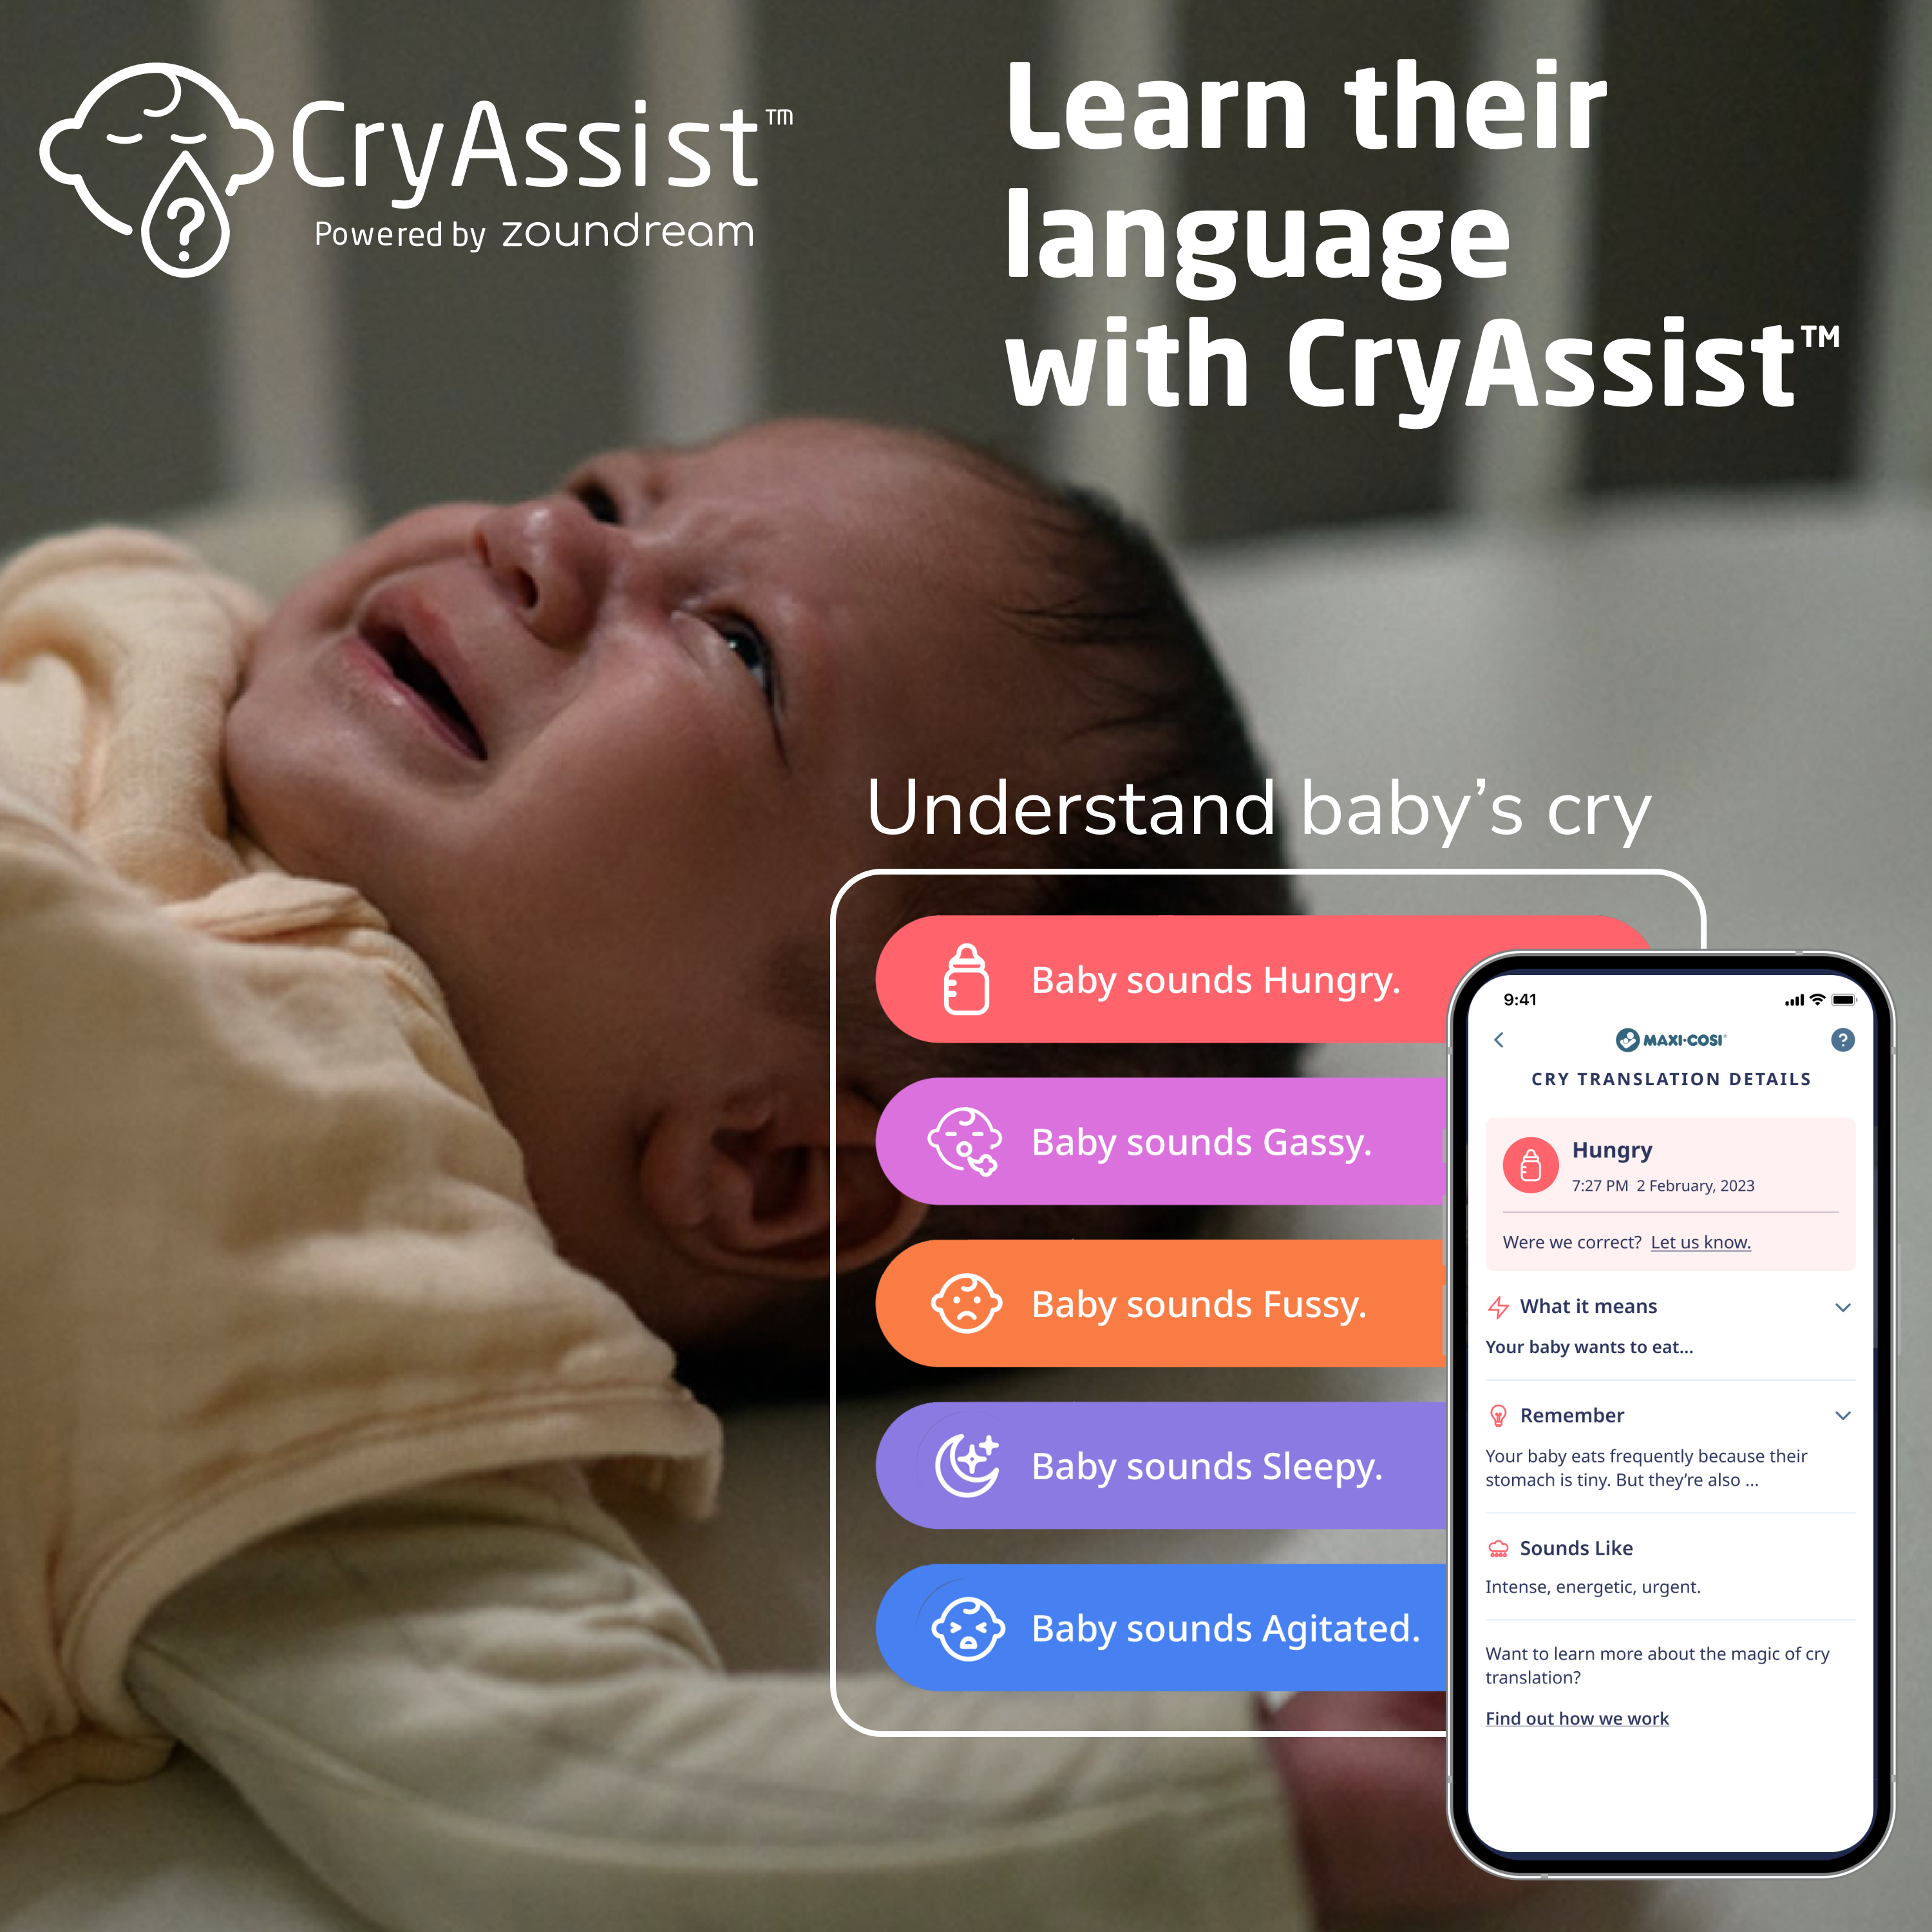 Learn their language with Cry Assist